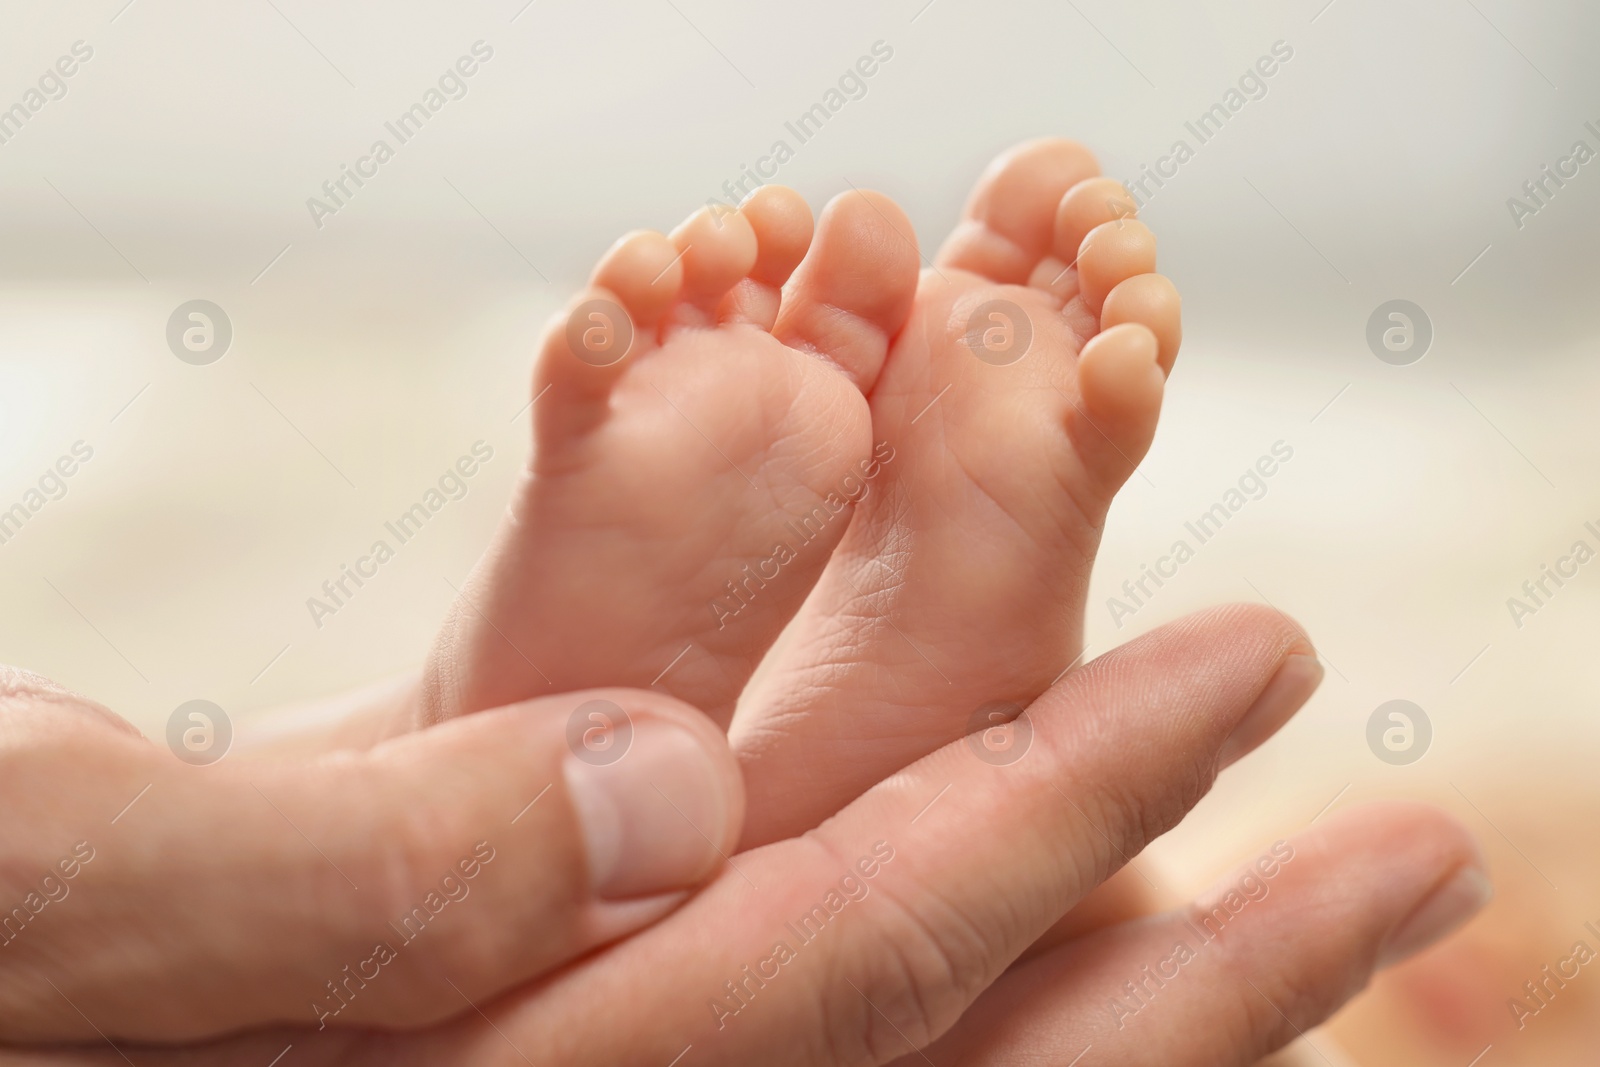 Photo of Father holding his newborn baby, closeup view on feet. Lovely family